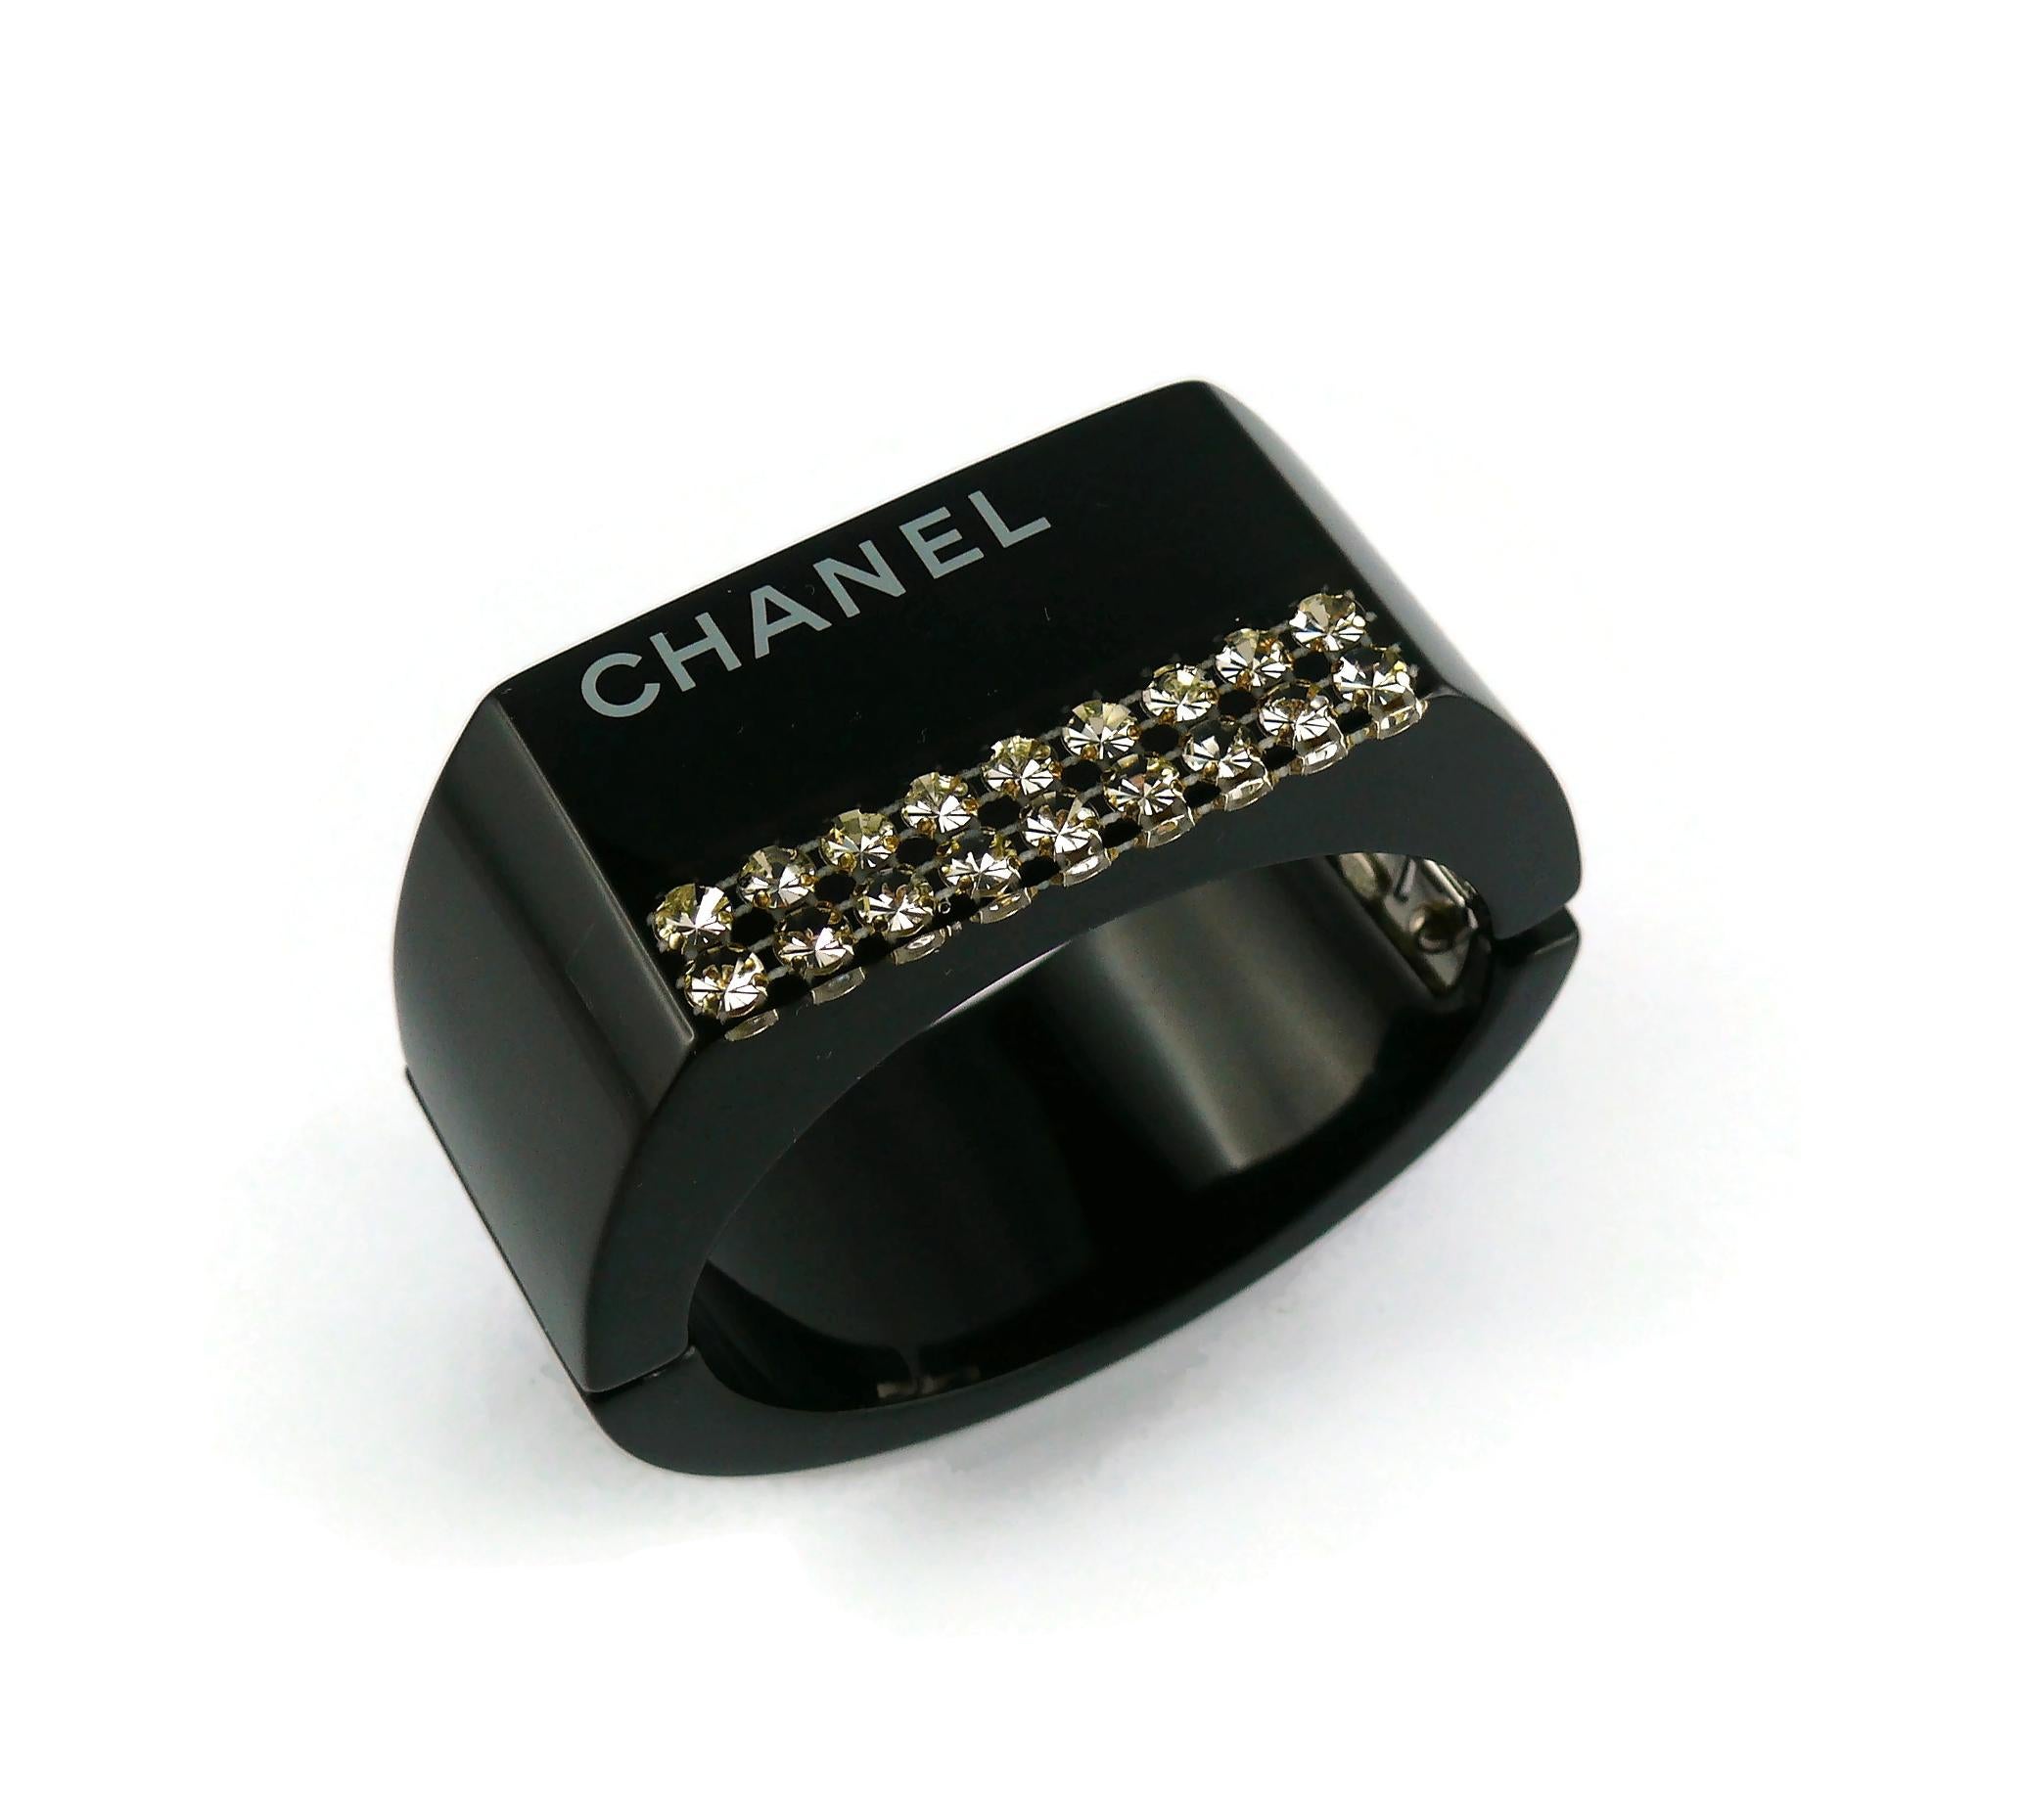 Chanel Black Resin Crystal Inlaid Clamper Cuff Bracelet For Sale 1